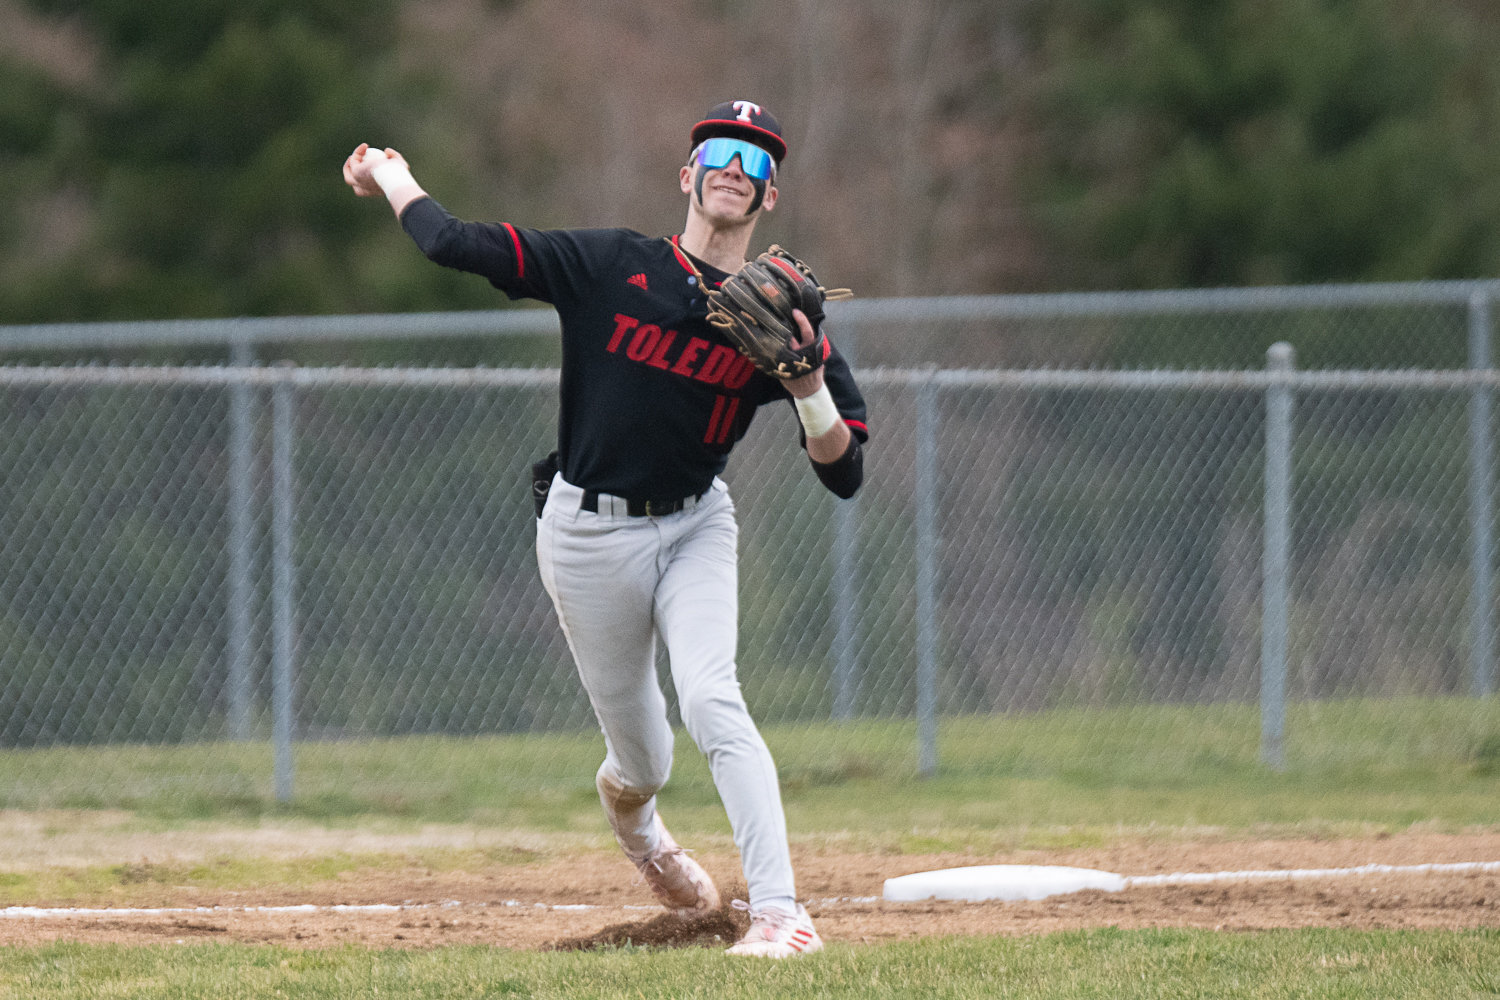 Toledo third baseman Carson Gould throws across the diamond during the first of the Riverhawks' two games against Napavine on March 20.